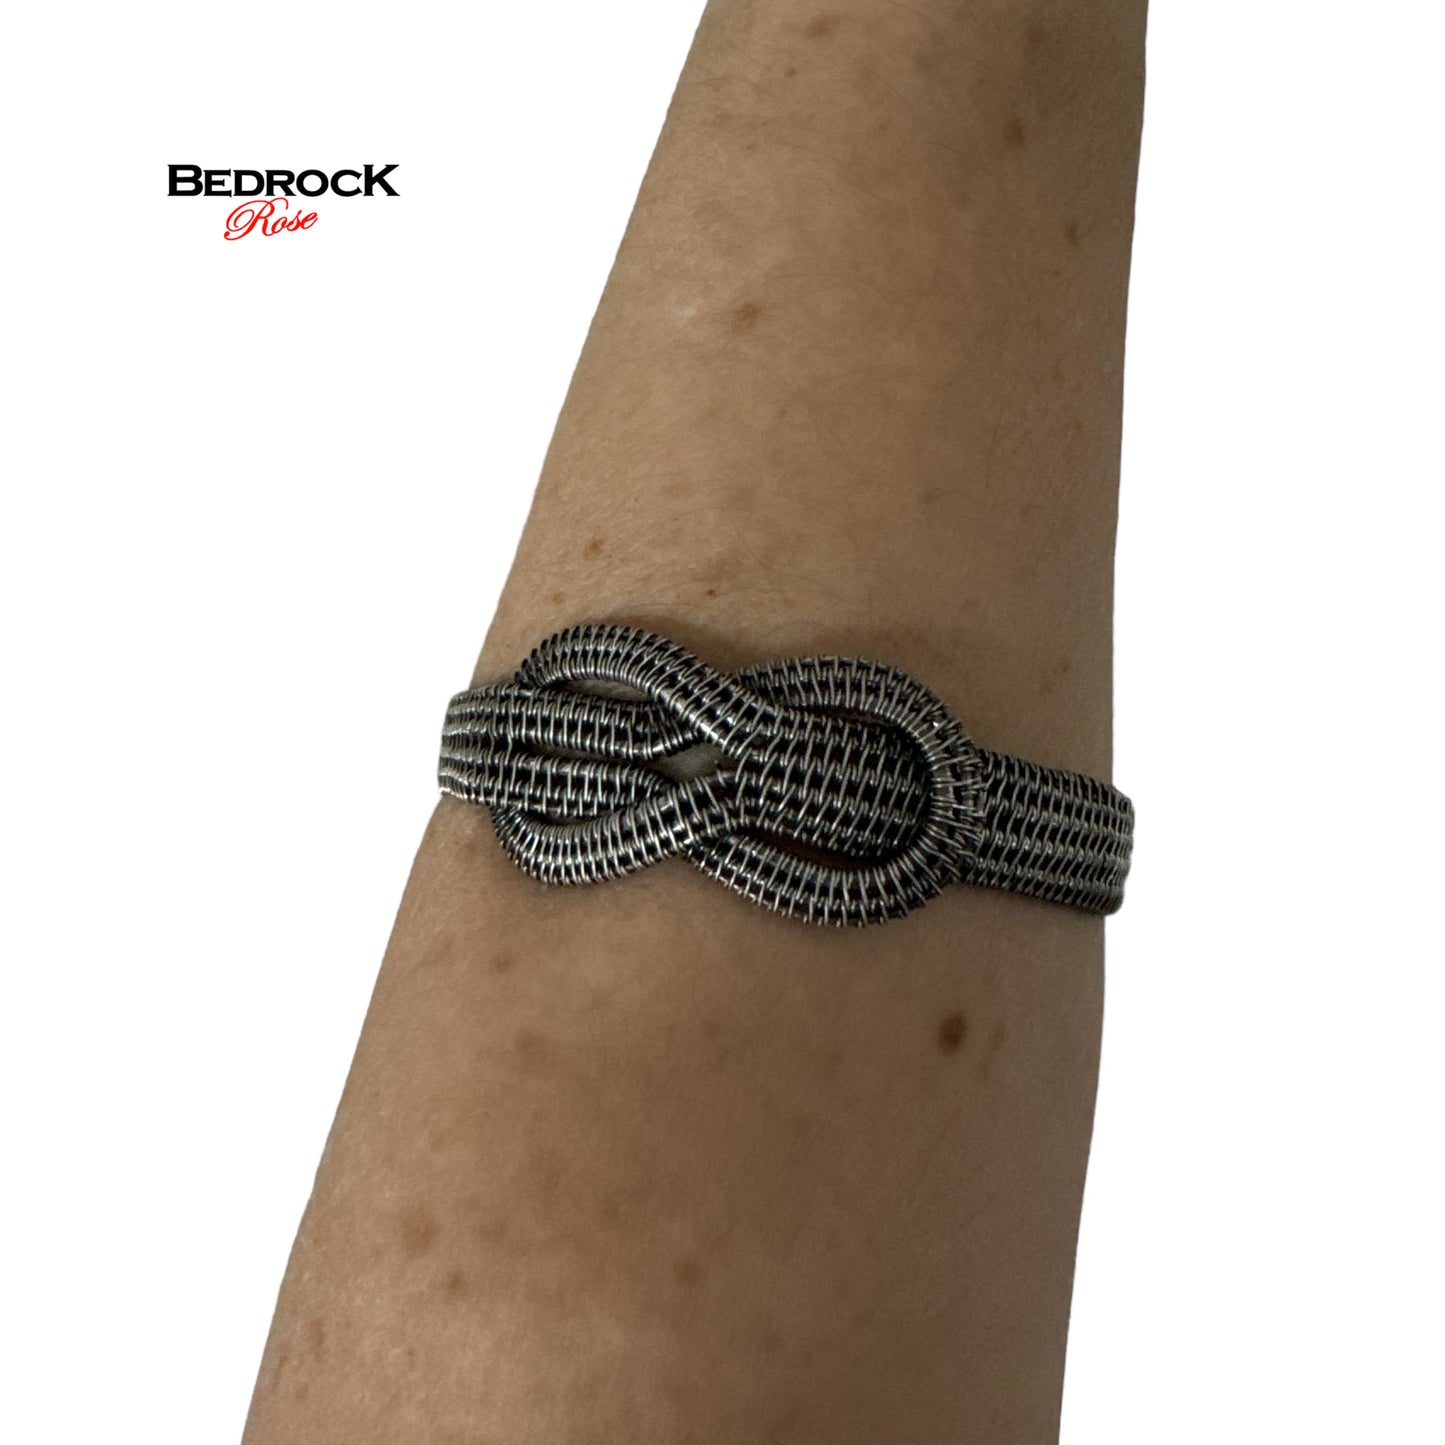 Woven sterling silver cuff with infinity symbol, Intricate silver wire jewelry bracelet